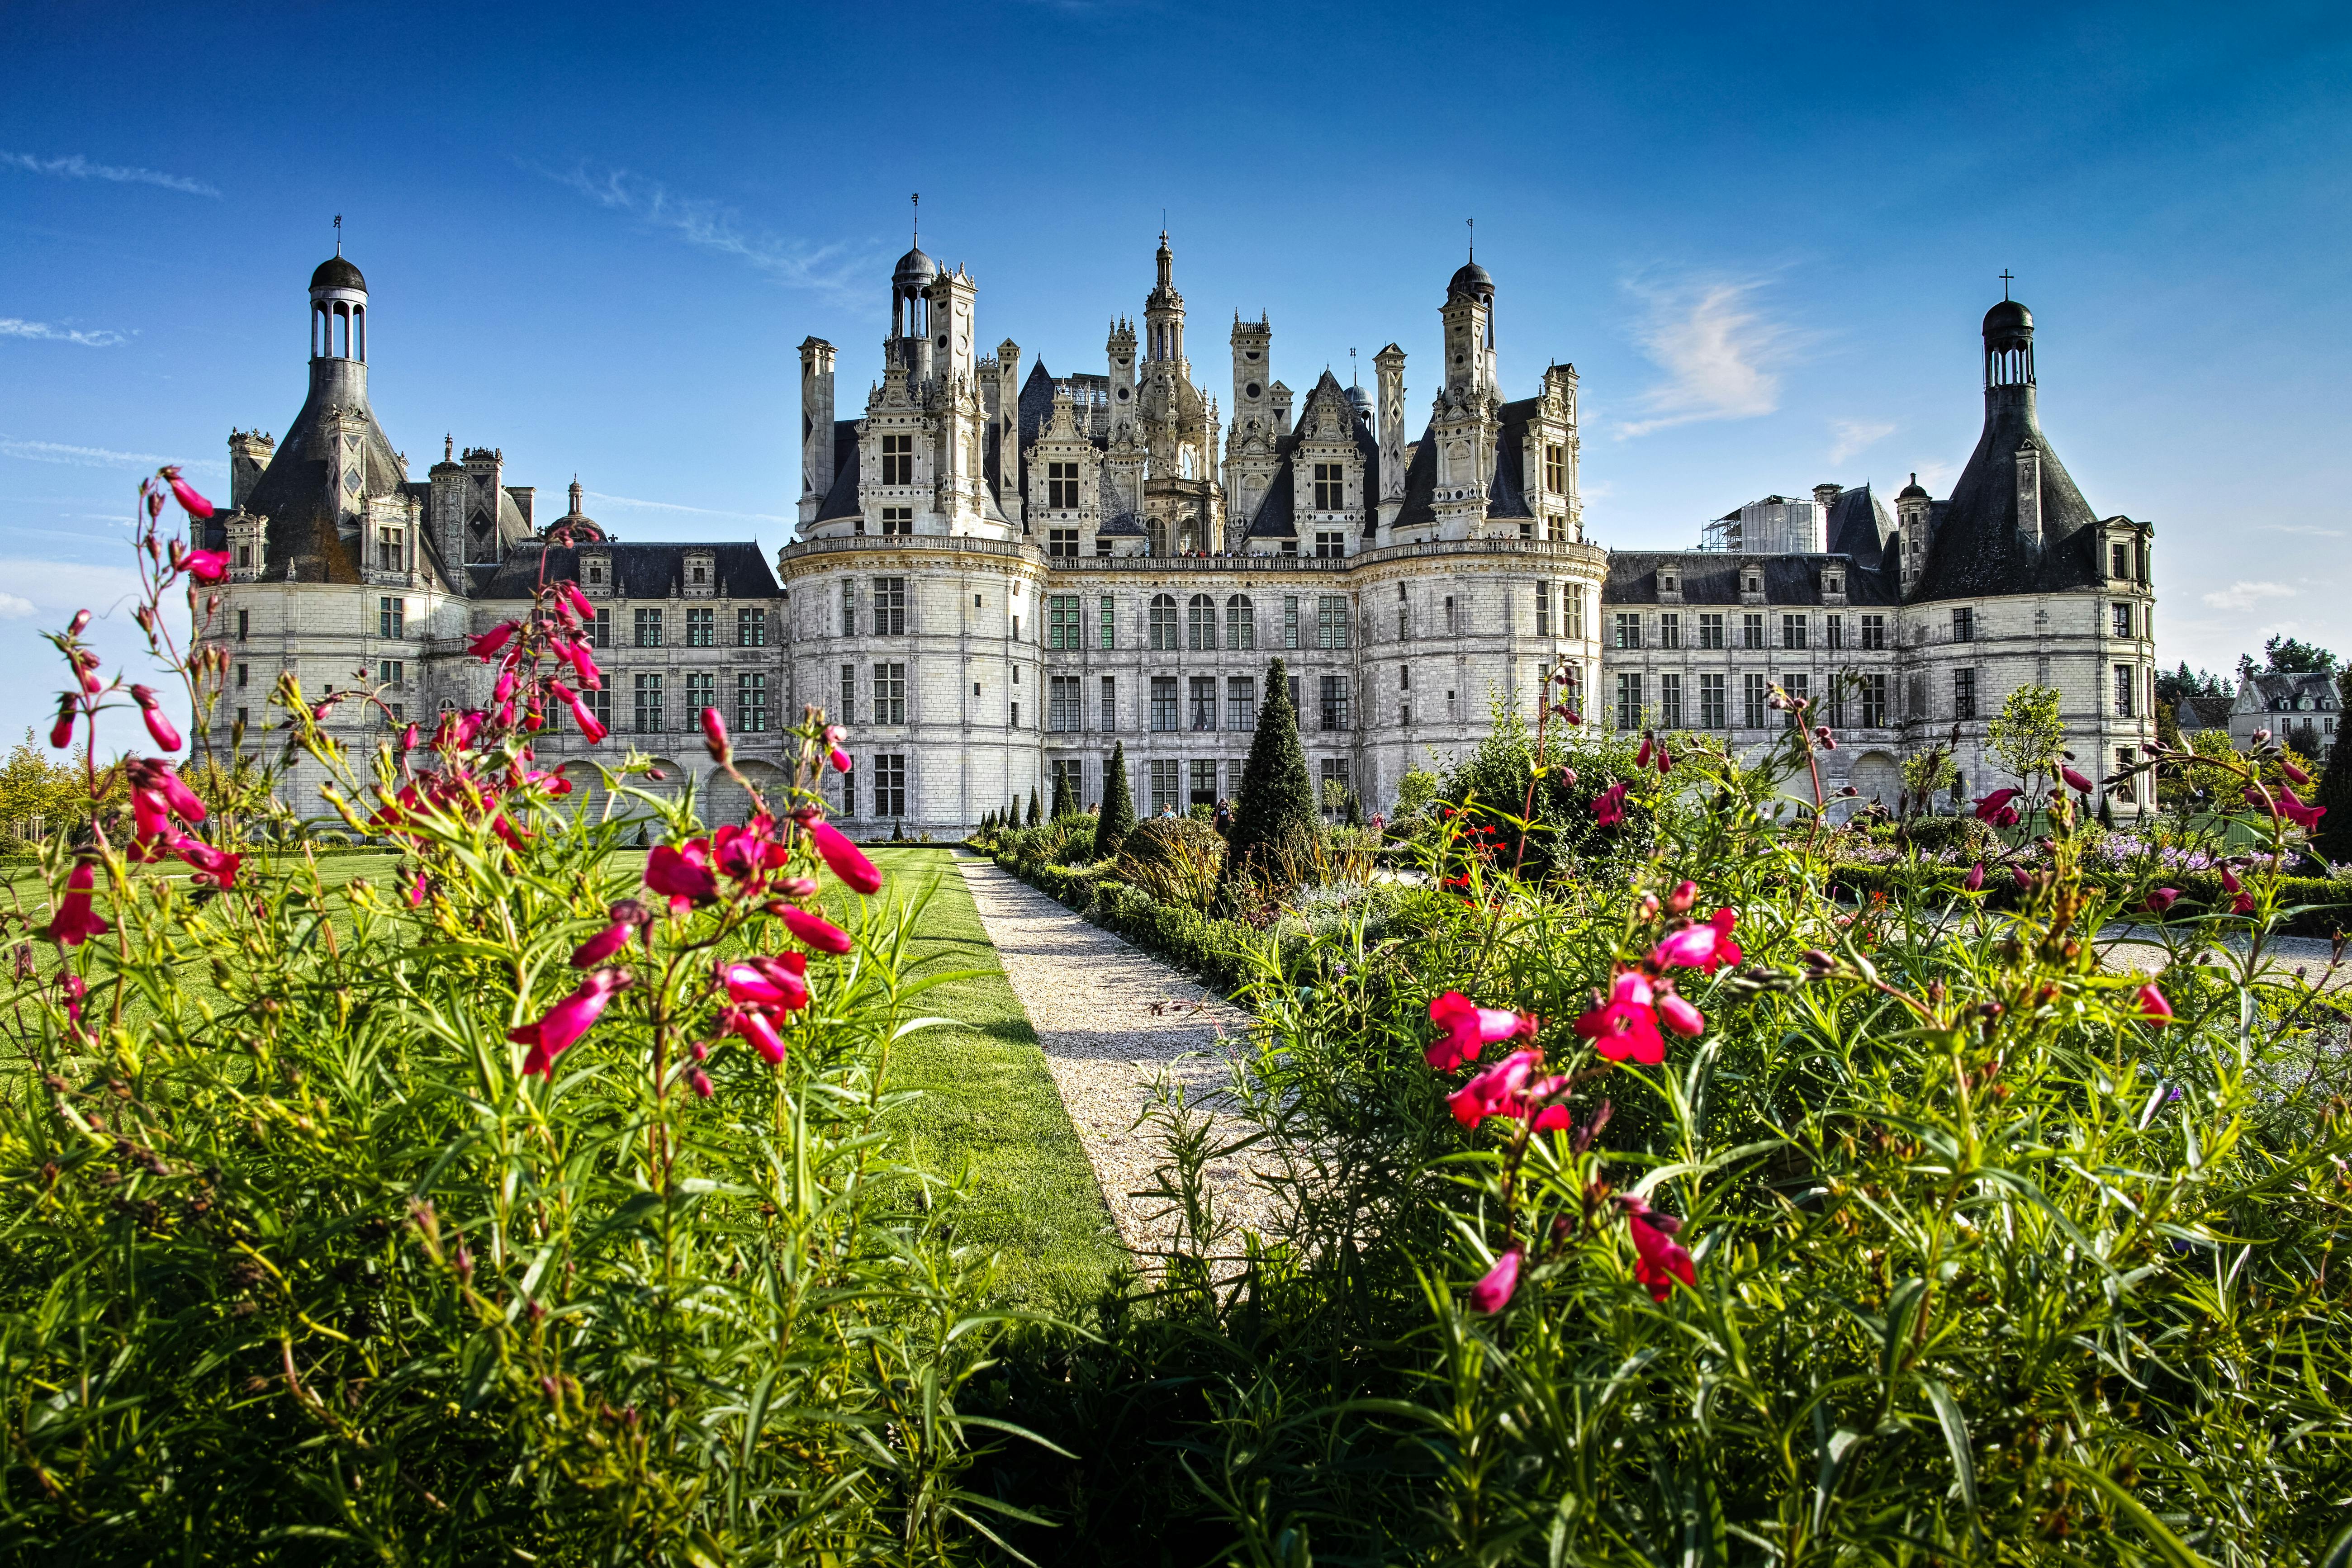 Private day trip from Paris to Loire Valley Castles by train